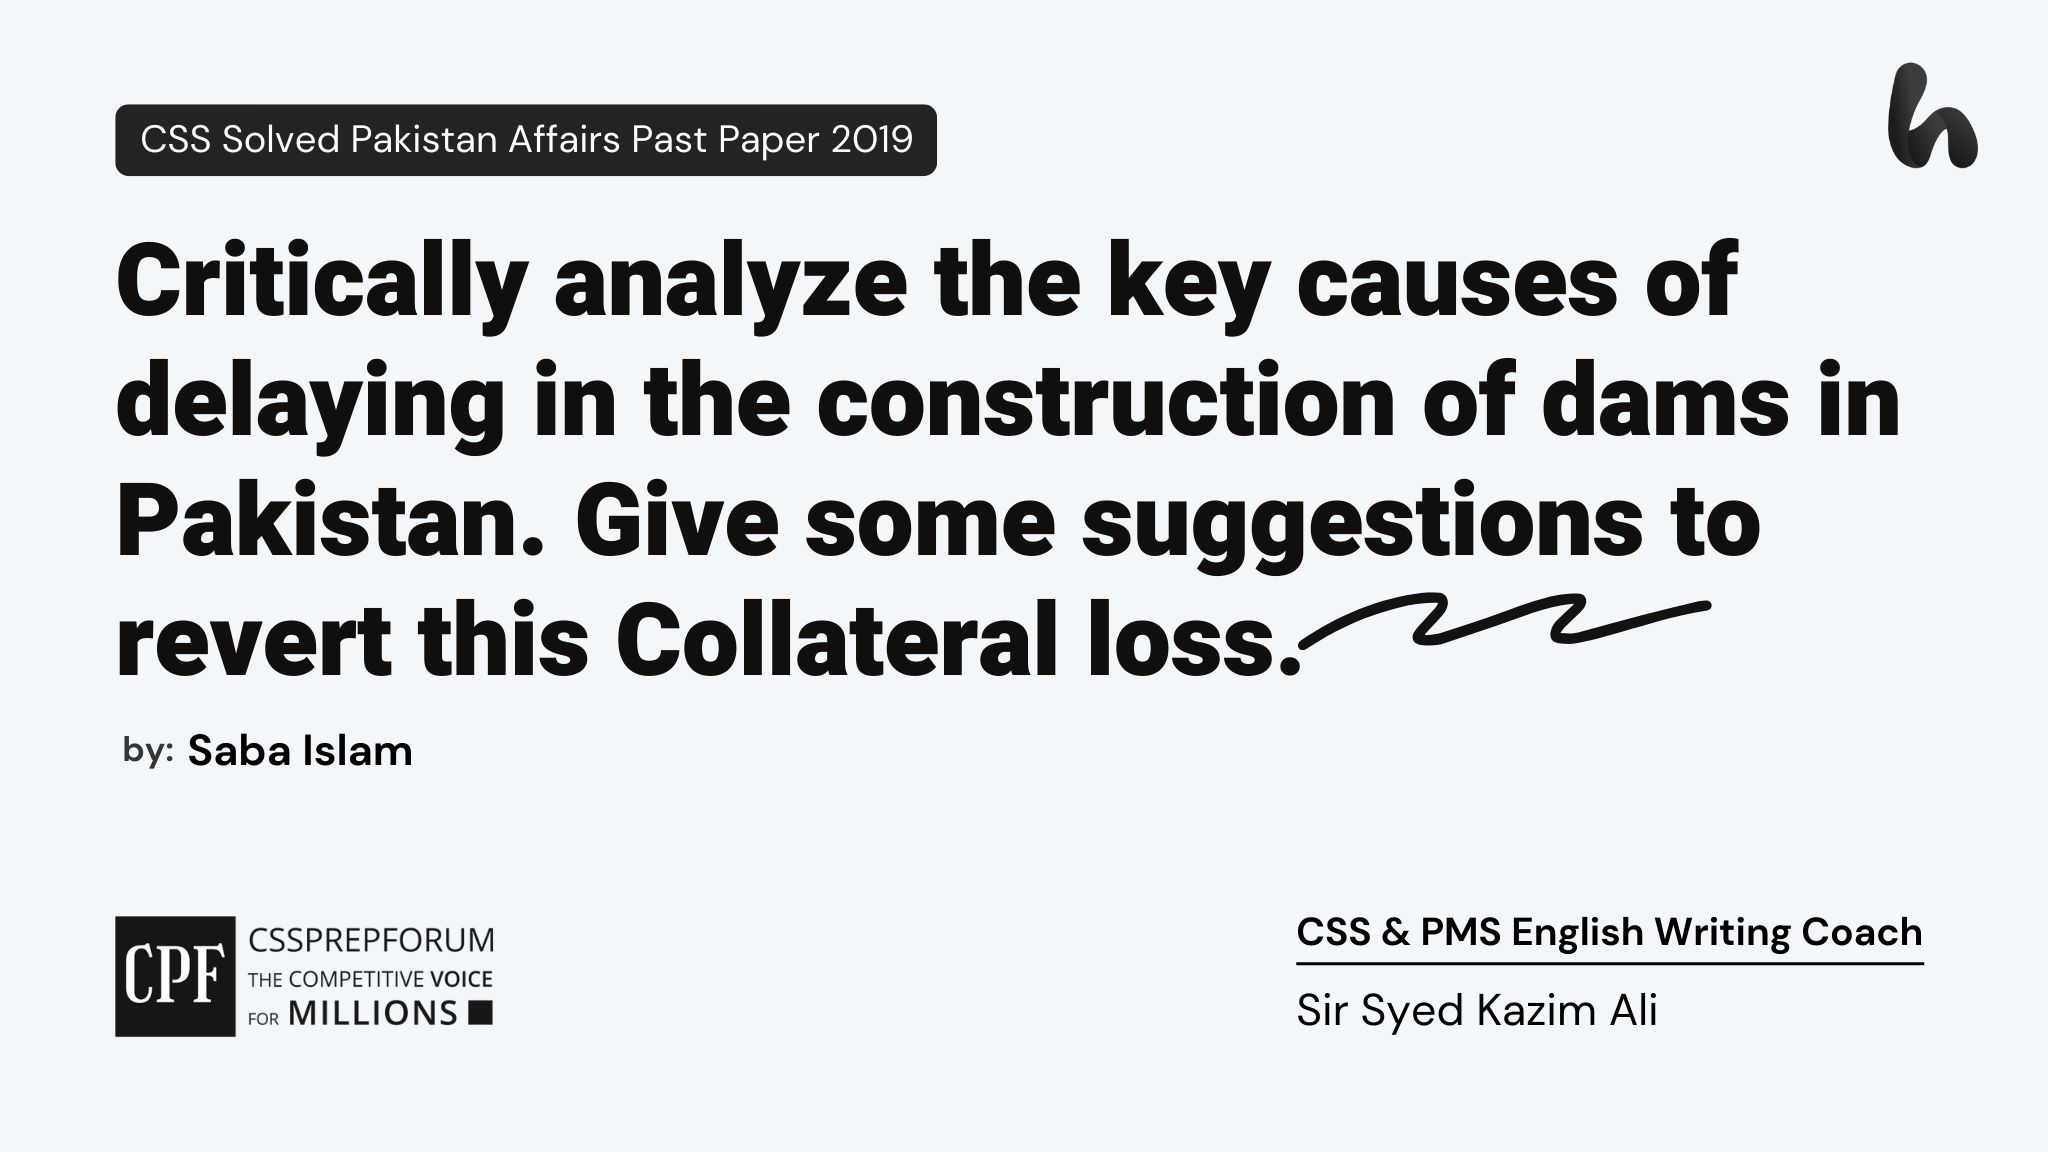 Critically analyze the key causes of delaying in the construction of dams in Pakistan. Give some suggestions to revert this Collateral loss.